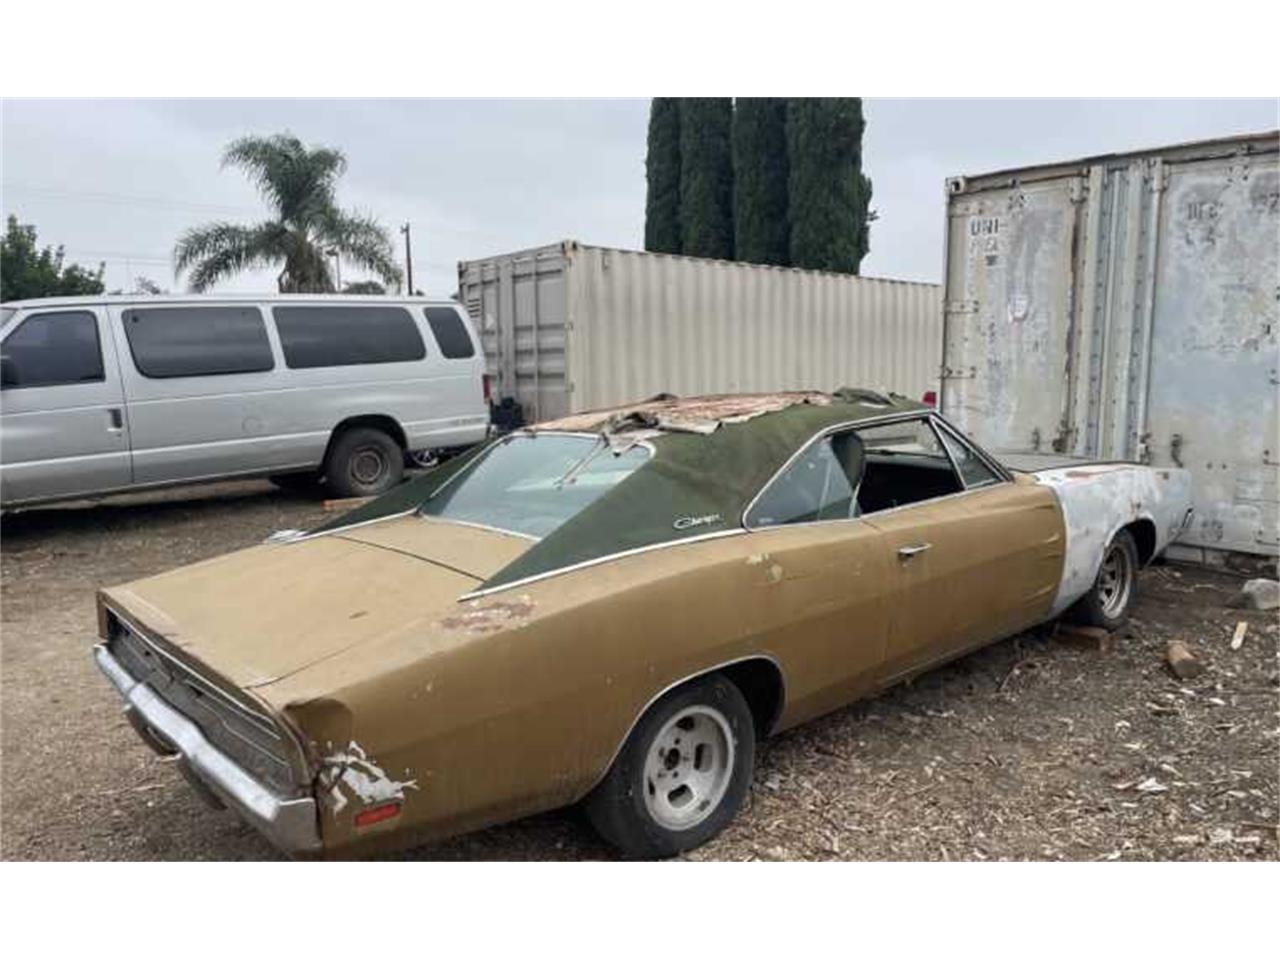 For Sale: 1969 Dodge Charger in Hobart, Indiana for sale in Hobart, IN